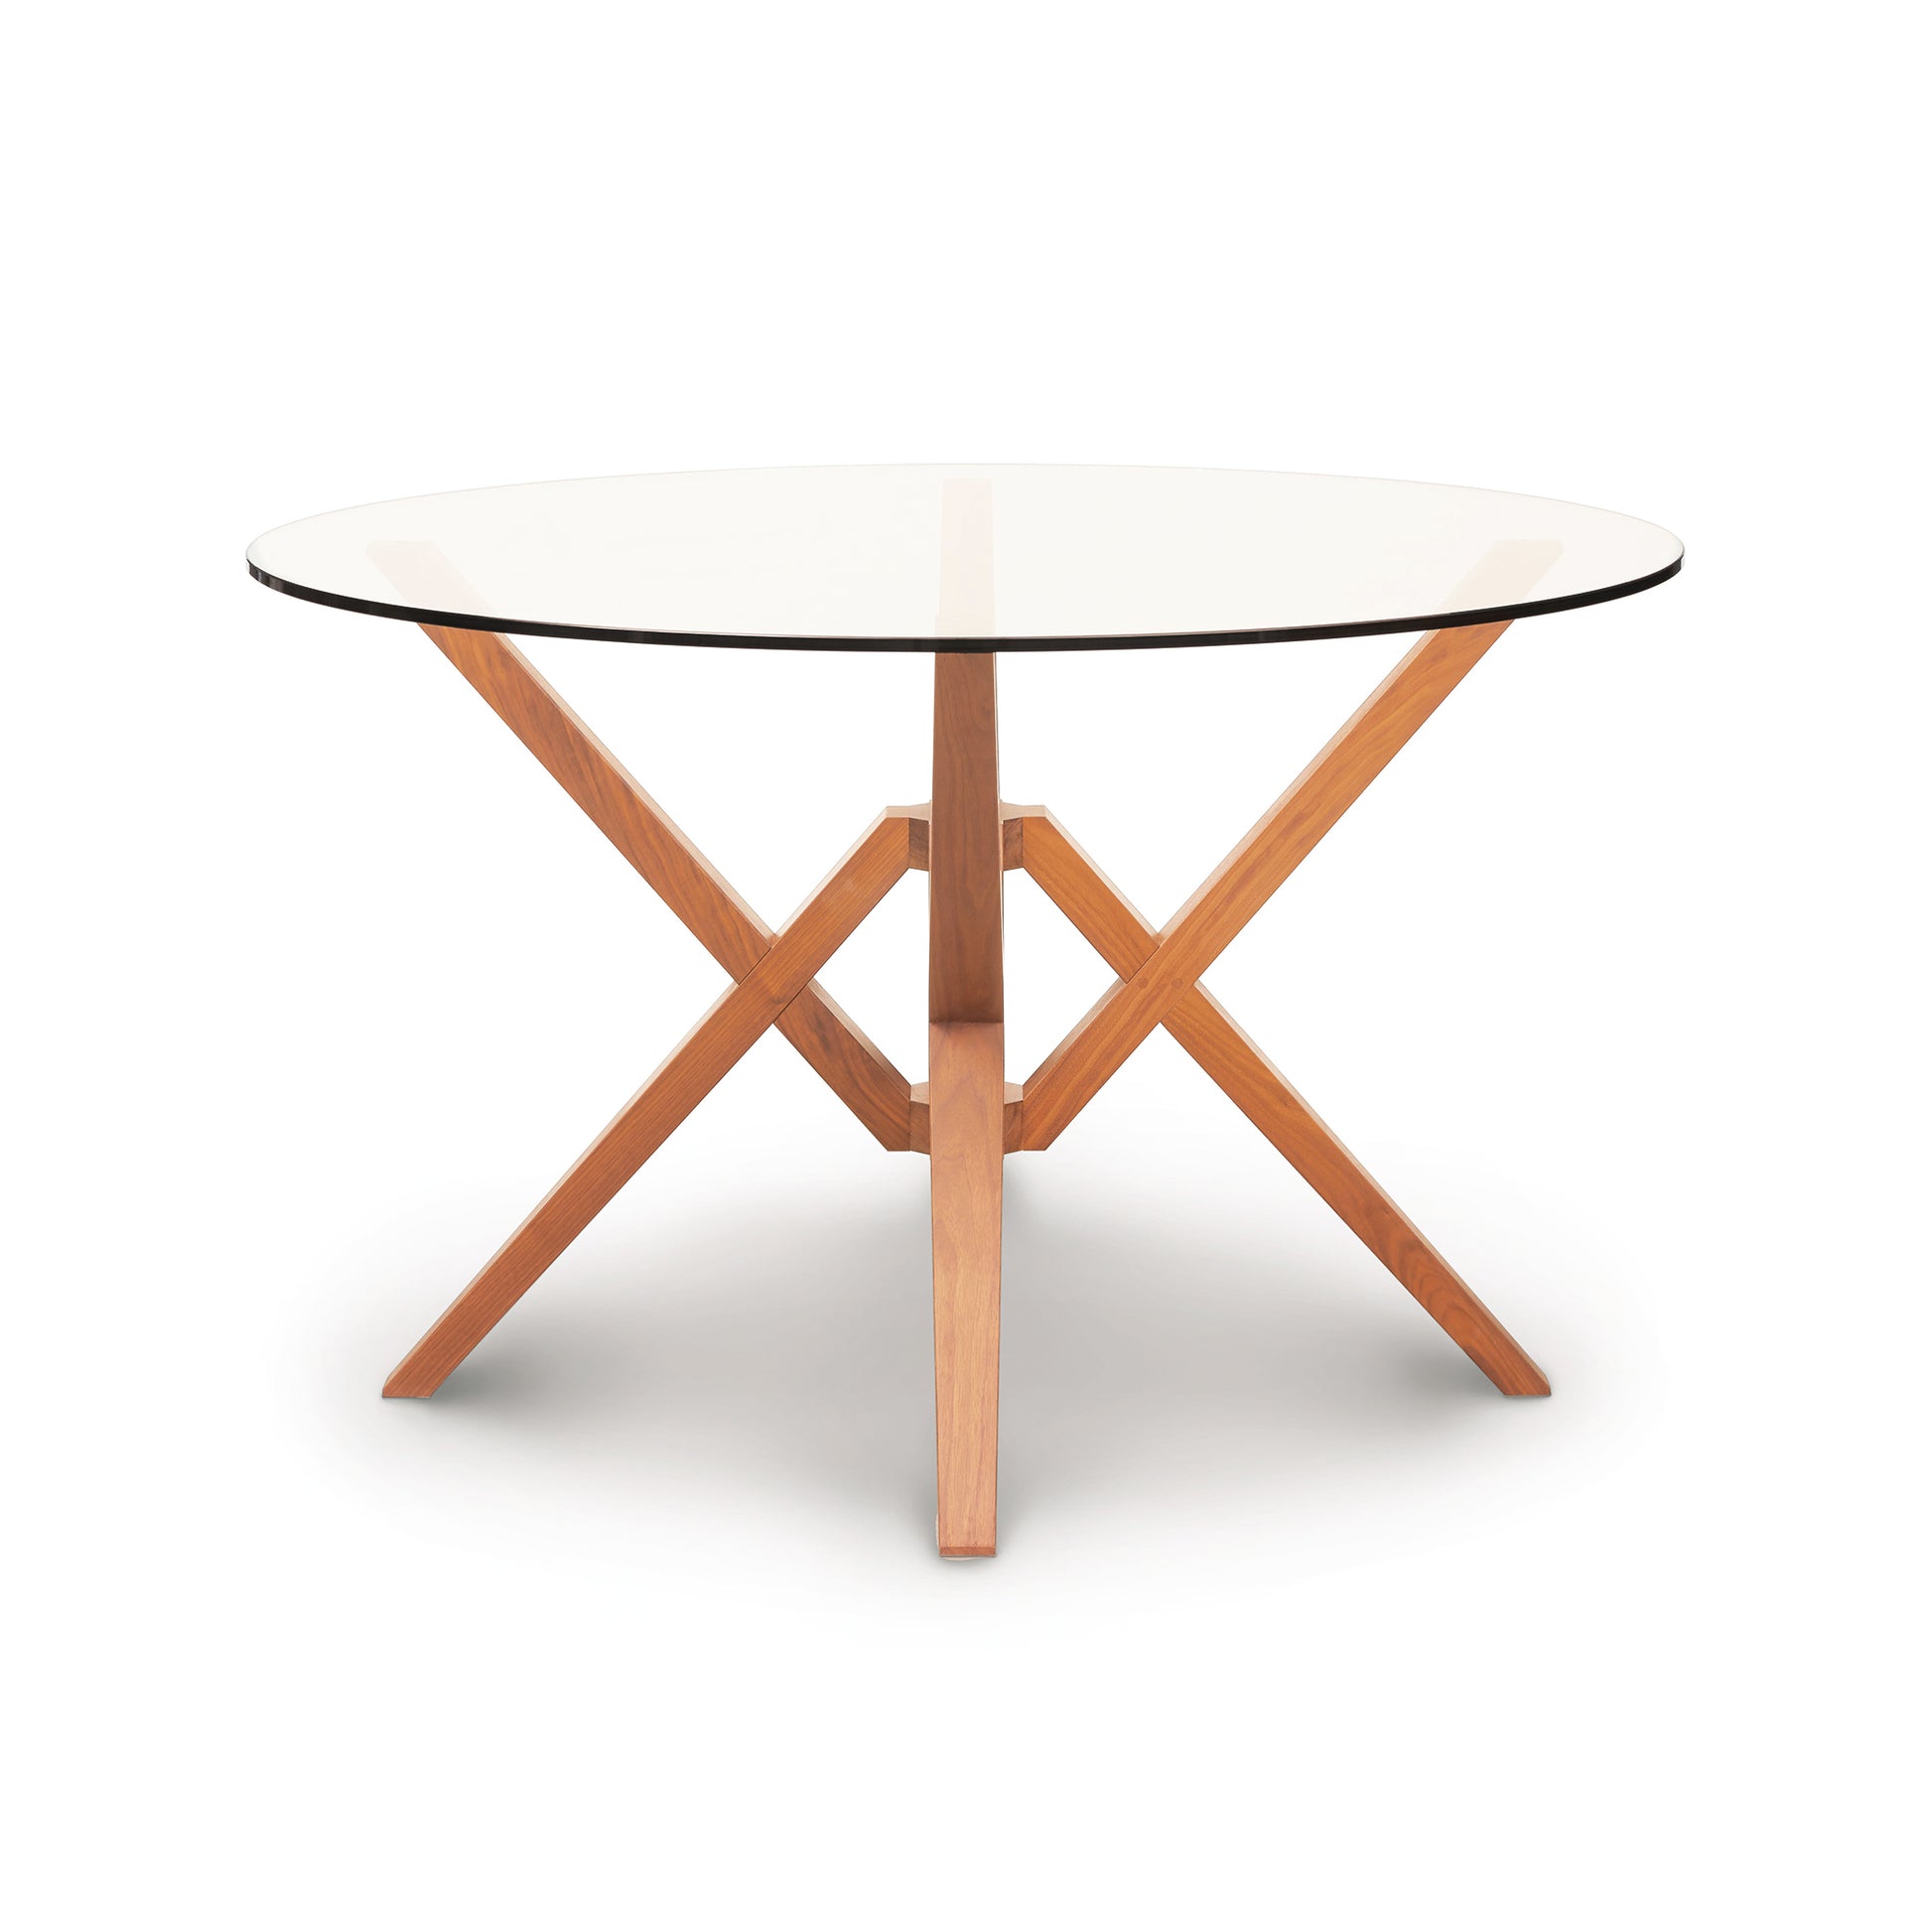 Copeland Furniture Exeter Round Glass Top Table with a solid wood crossed-leg base on a white background.